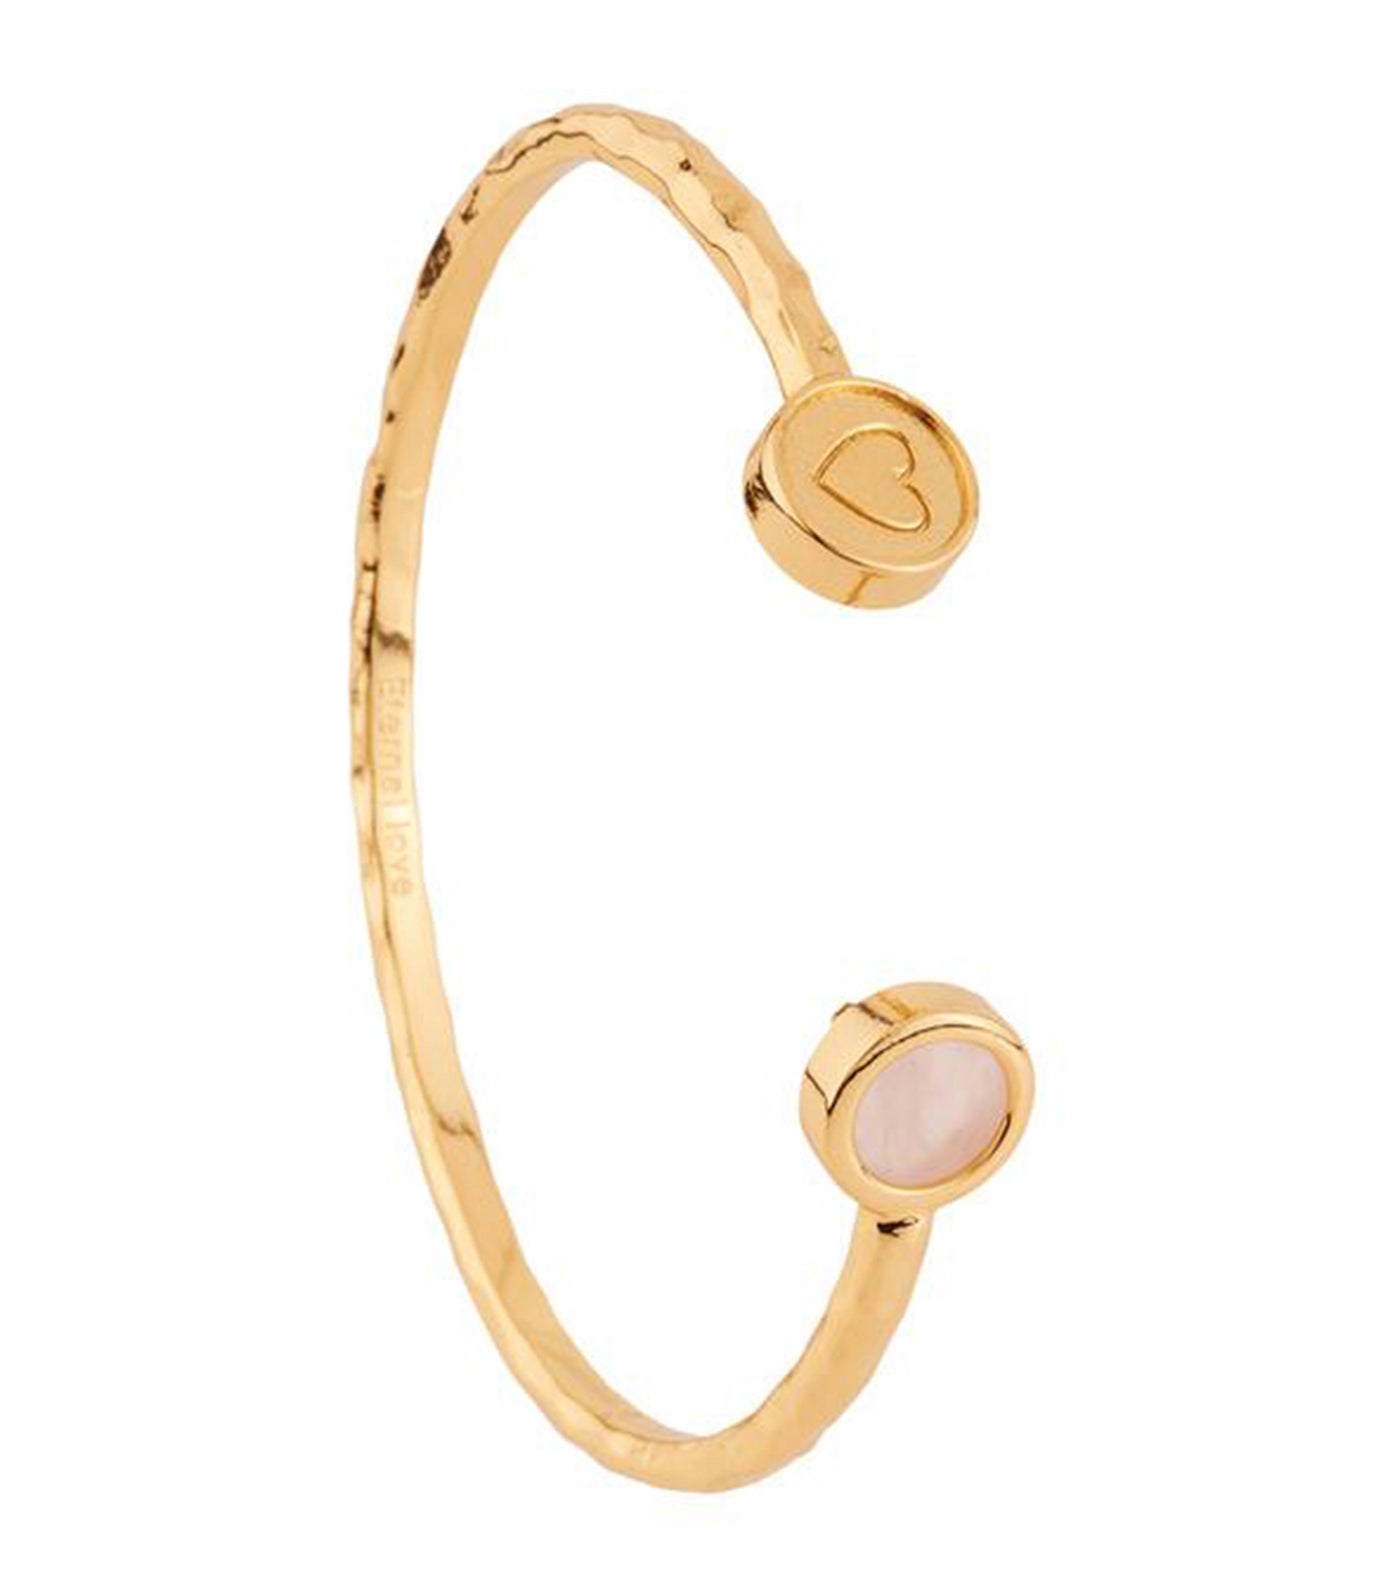 les néréides lucky bangle with love stone and crown